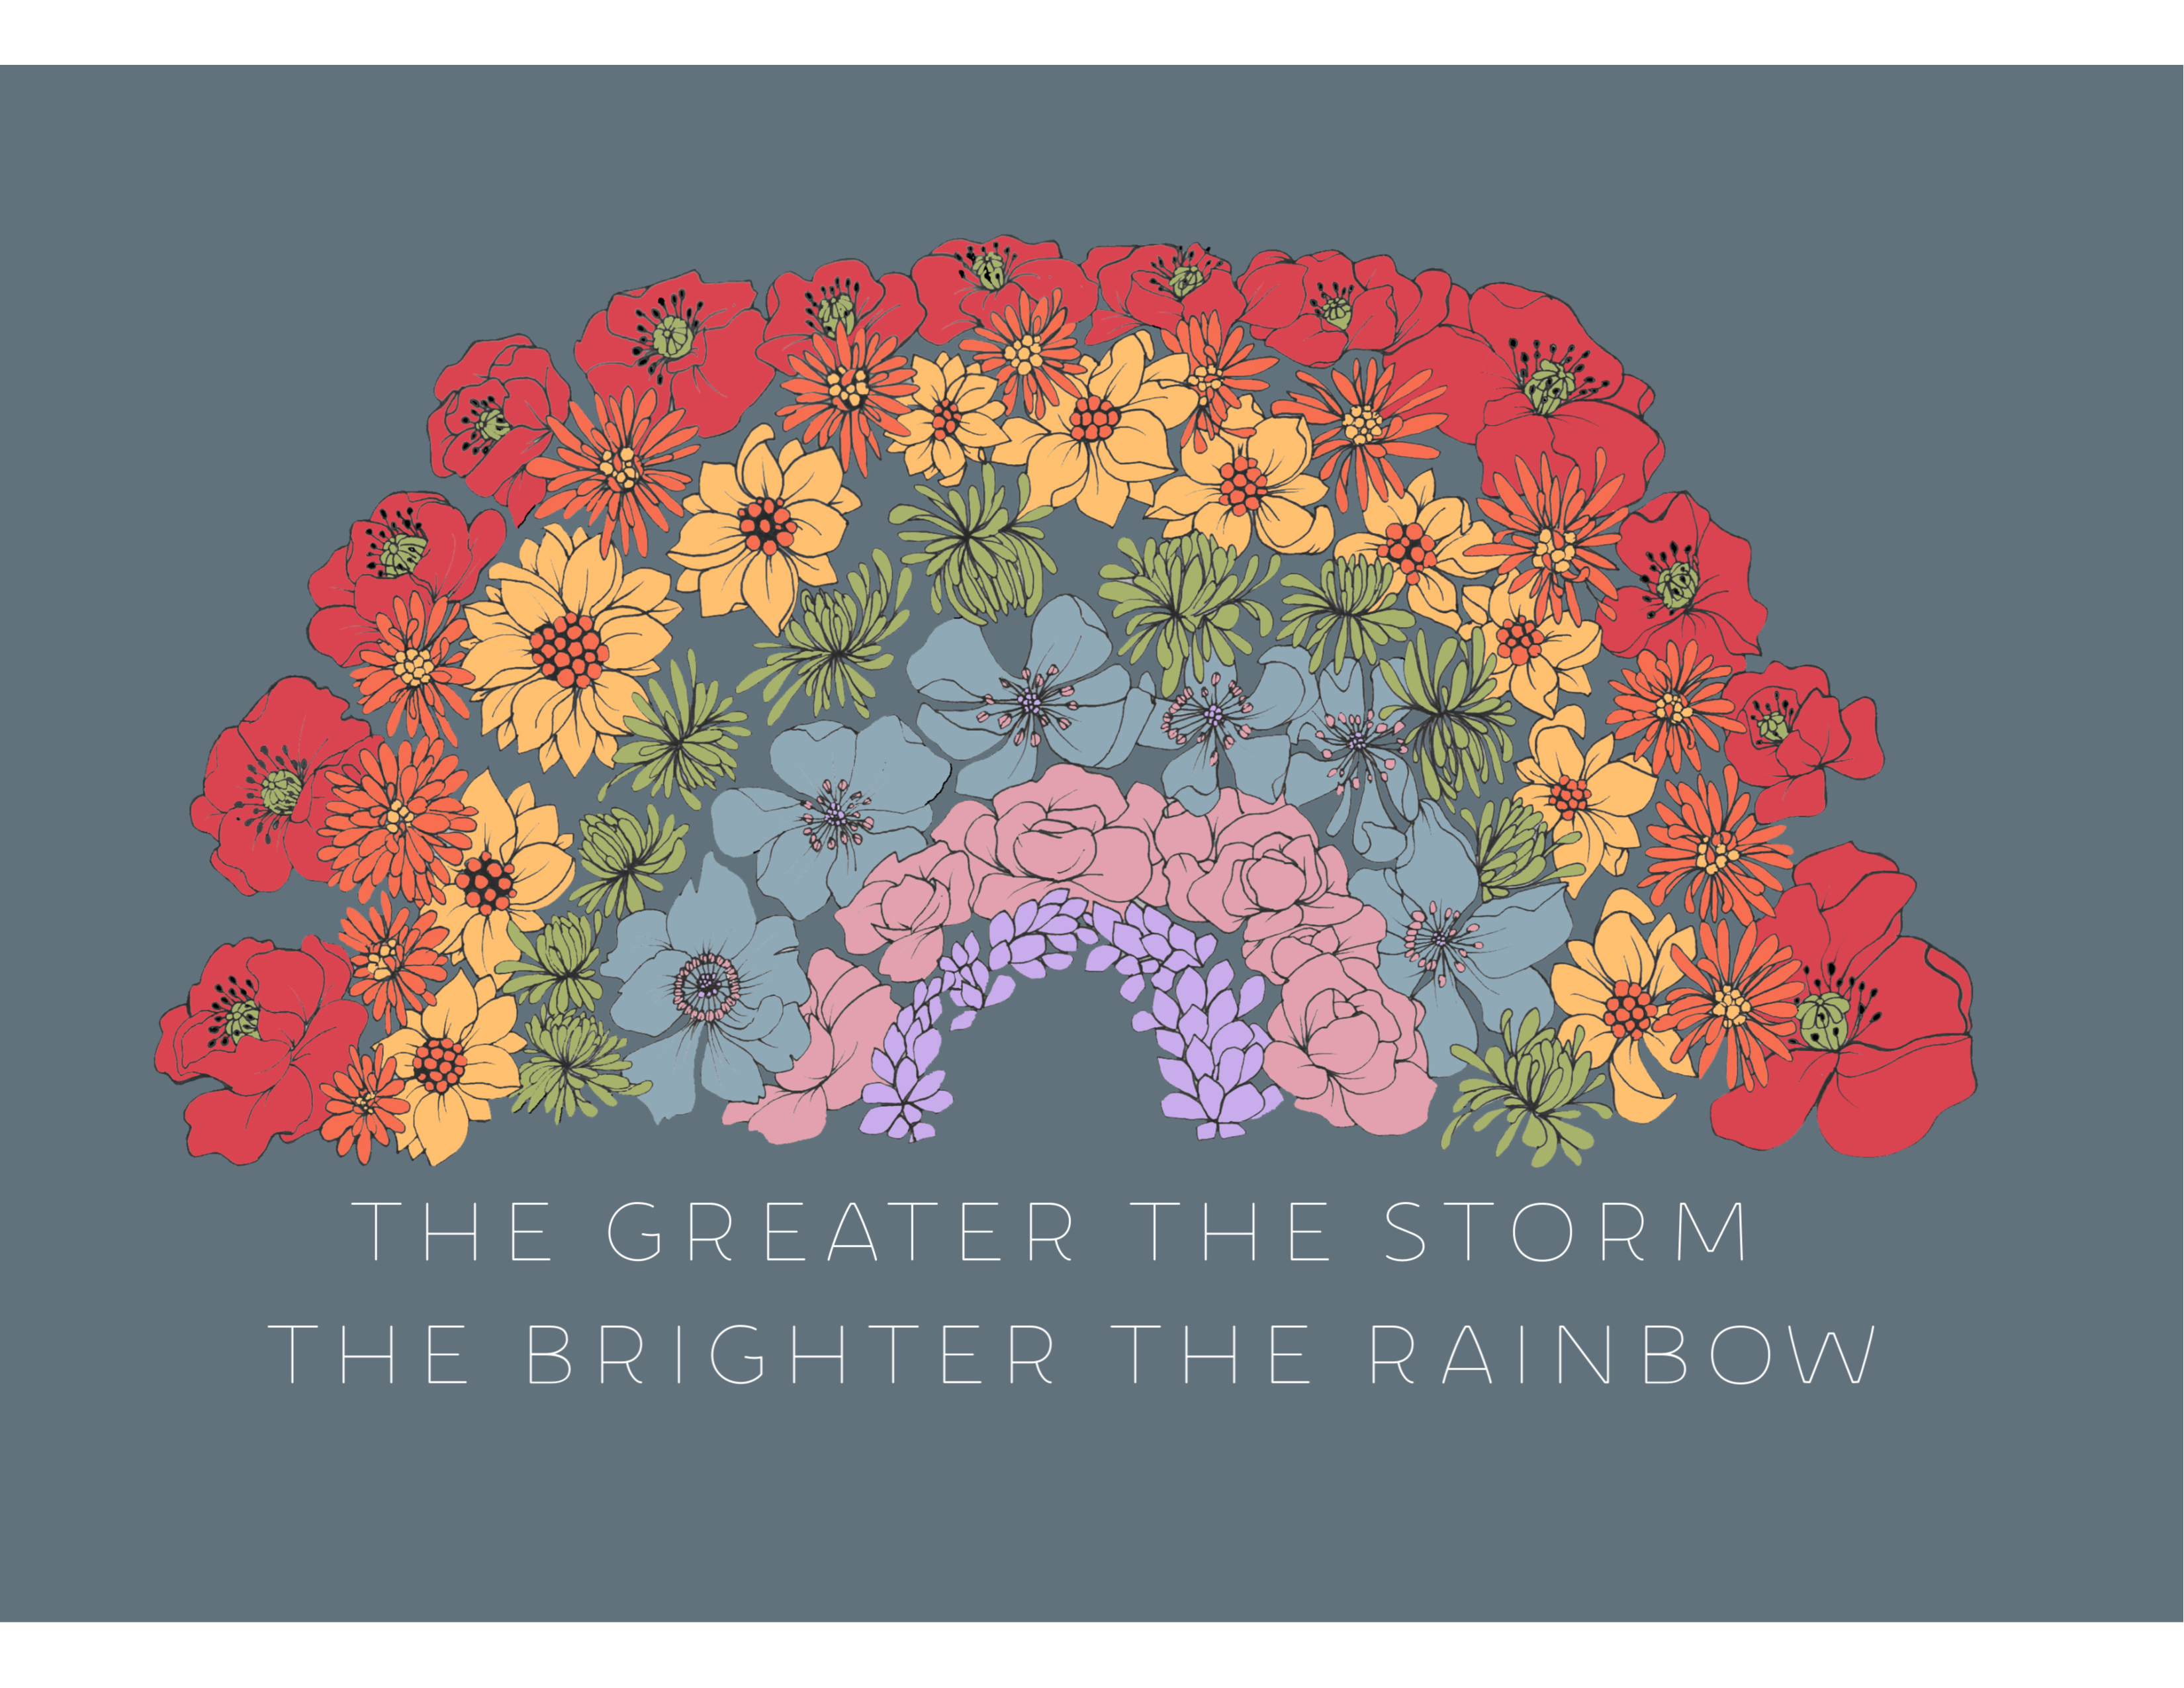 The Greater the storm the brighter the rainbow print